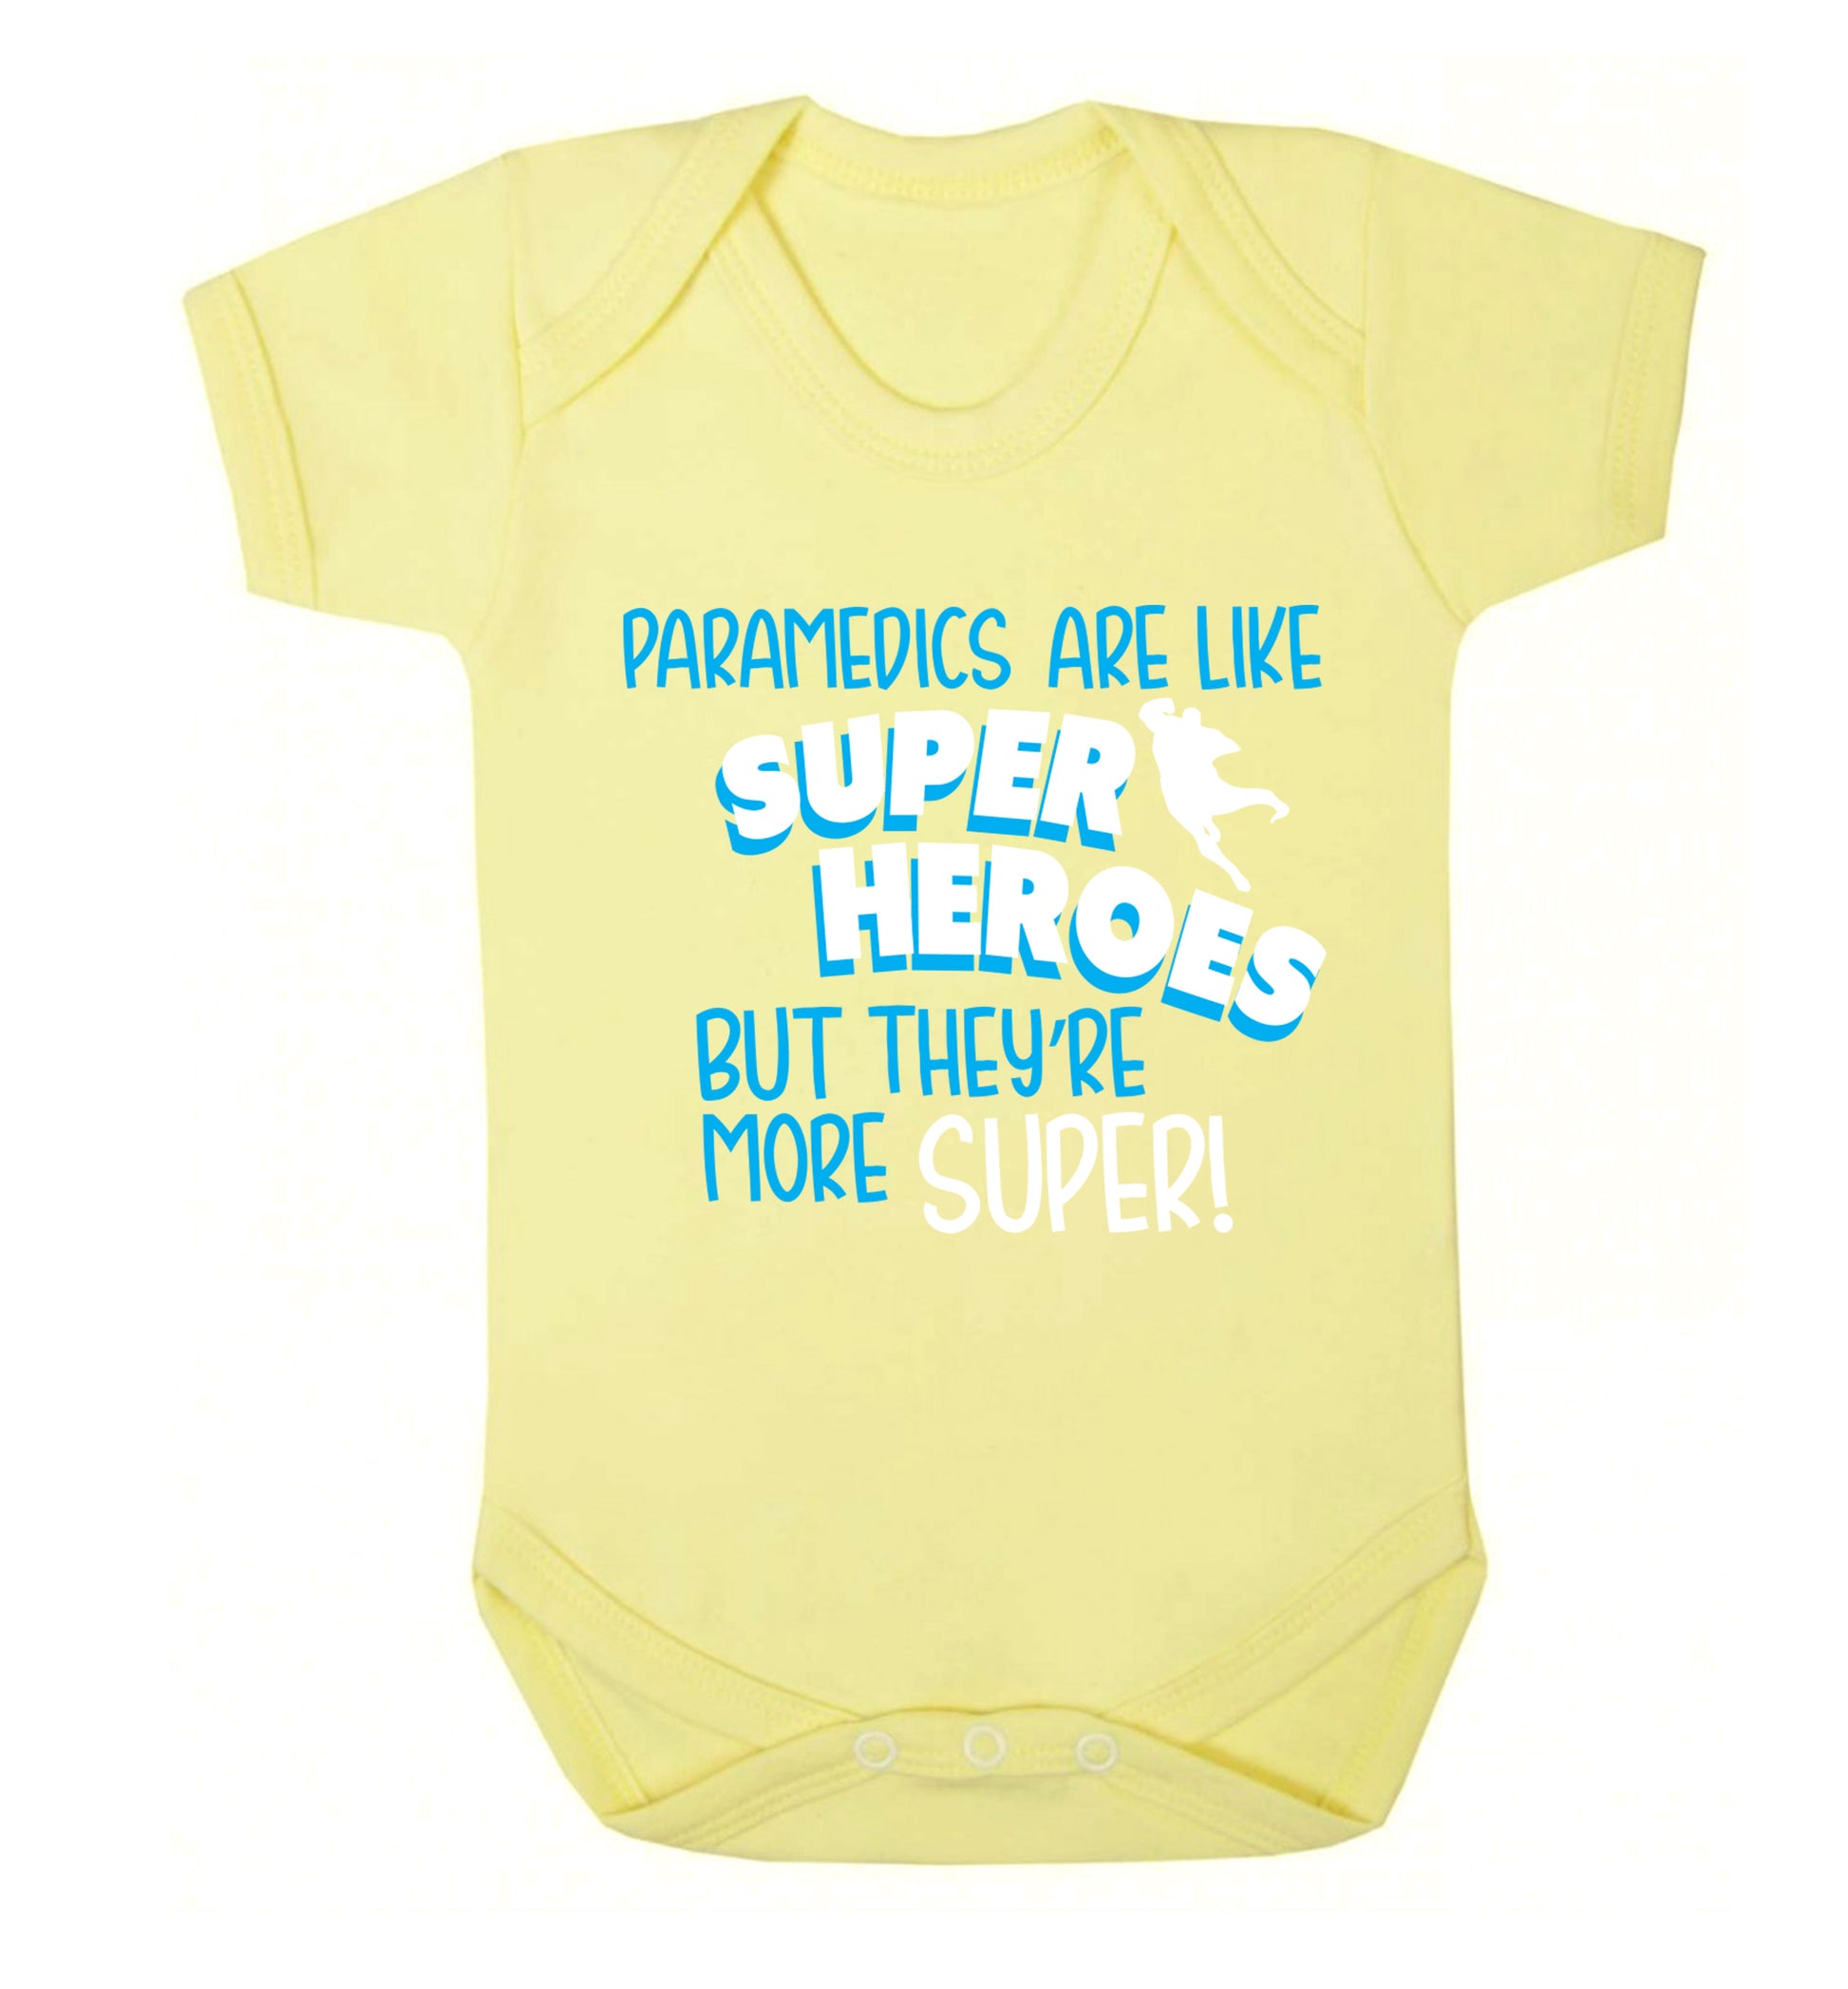 Paramedics are like superheros but they're more super Baby Vest pale yellow 18-24 months